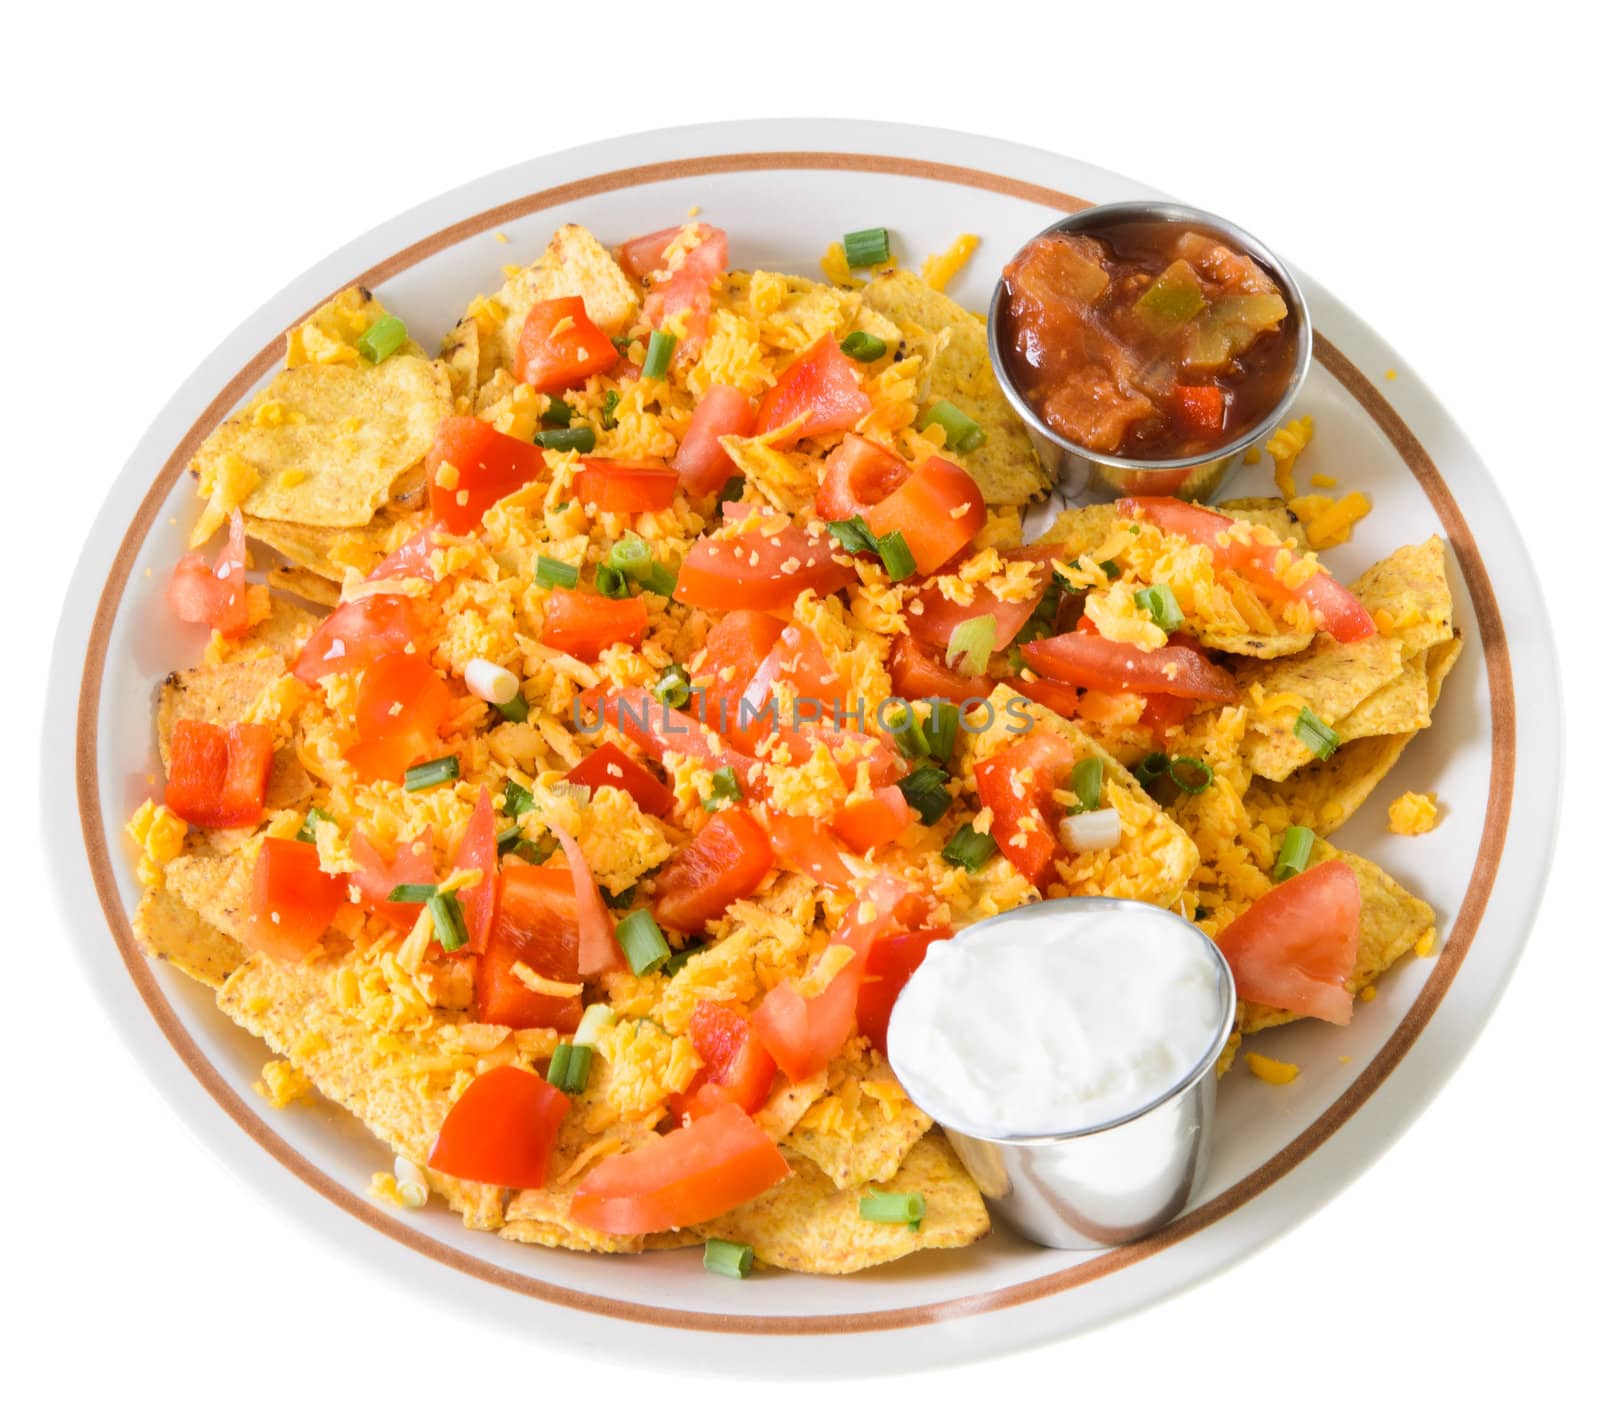 Plate of Nachos with Cheese by dragon_fang